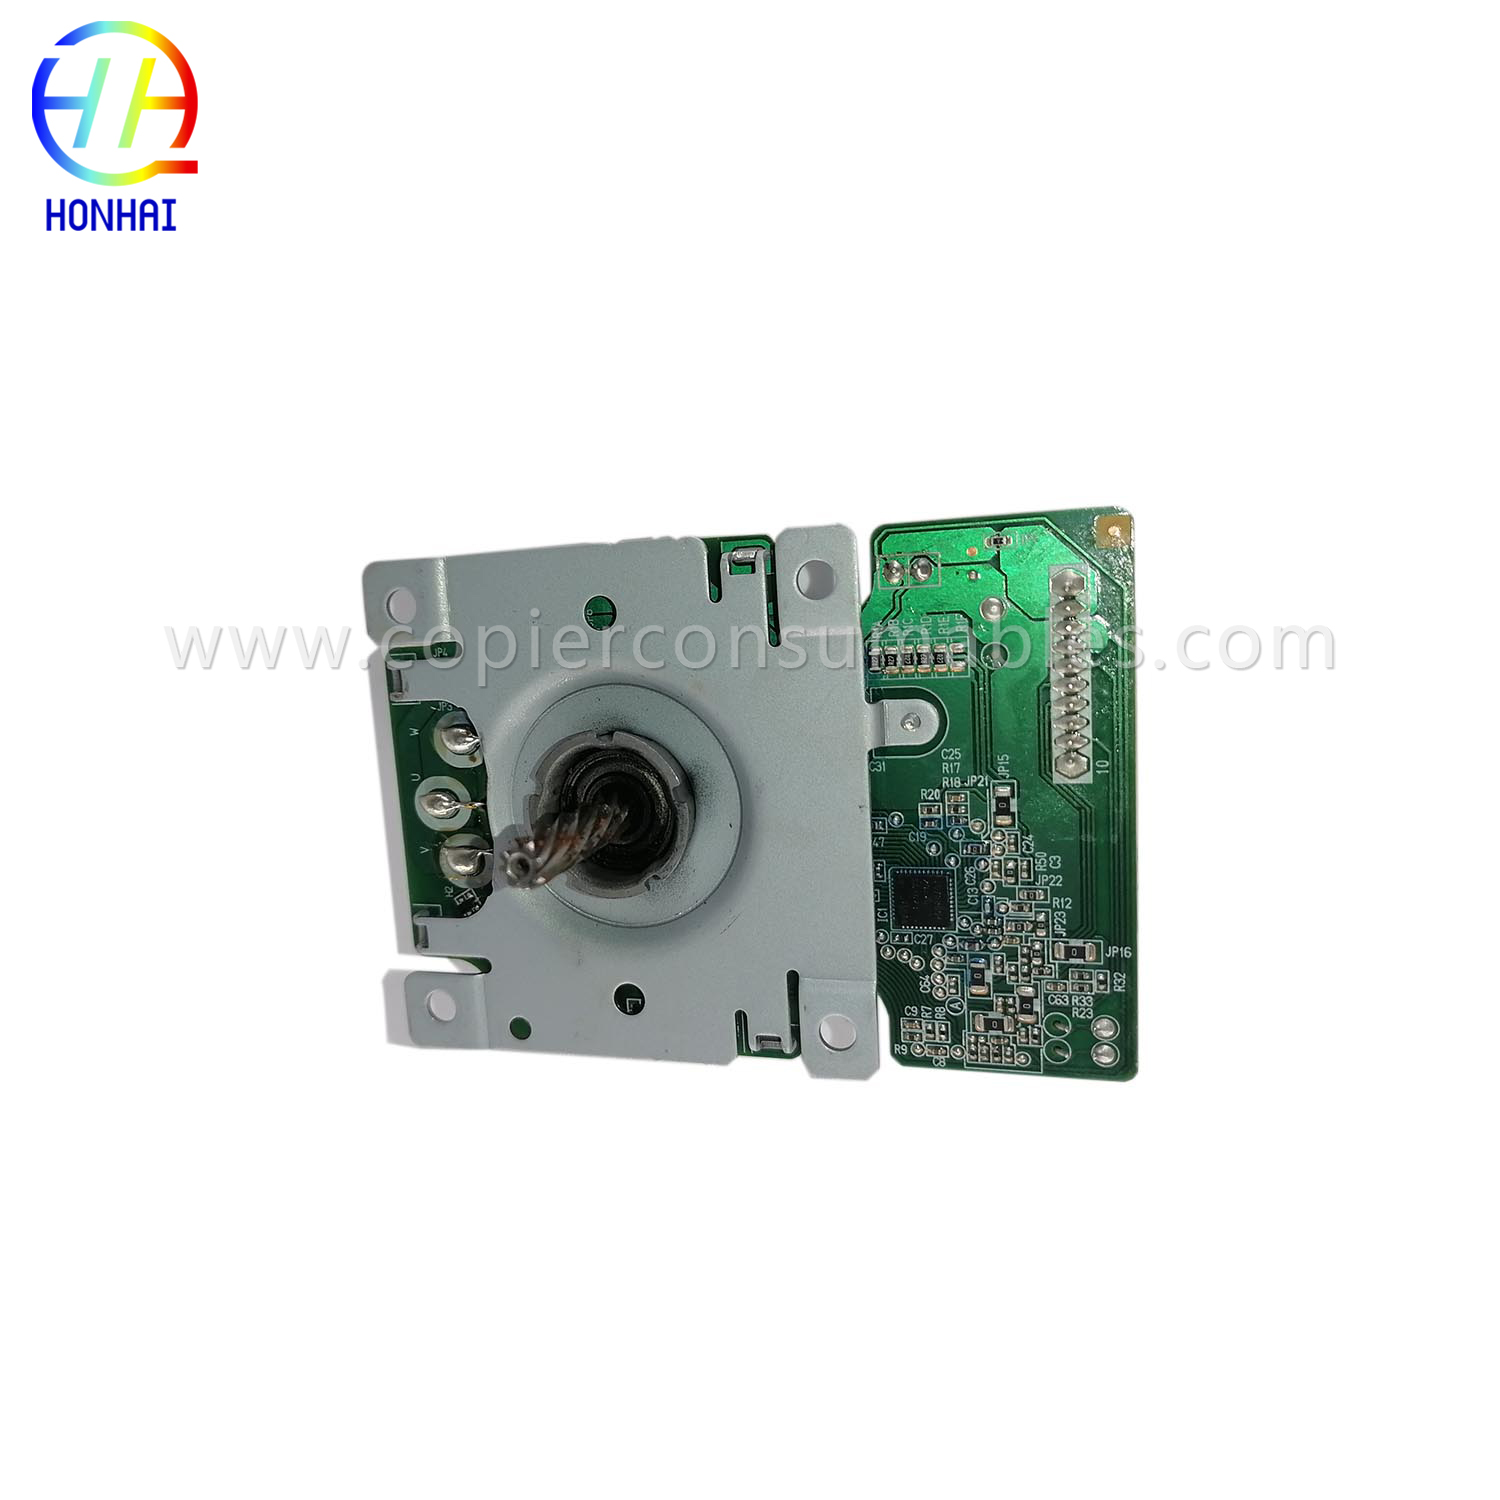 Hovedmotor for Ricoh MP2014AD 2014D 1120 IMC2700 2701 2702 (5) 拷贝